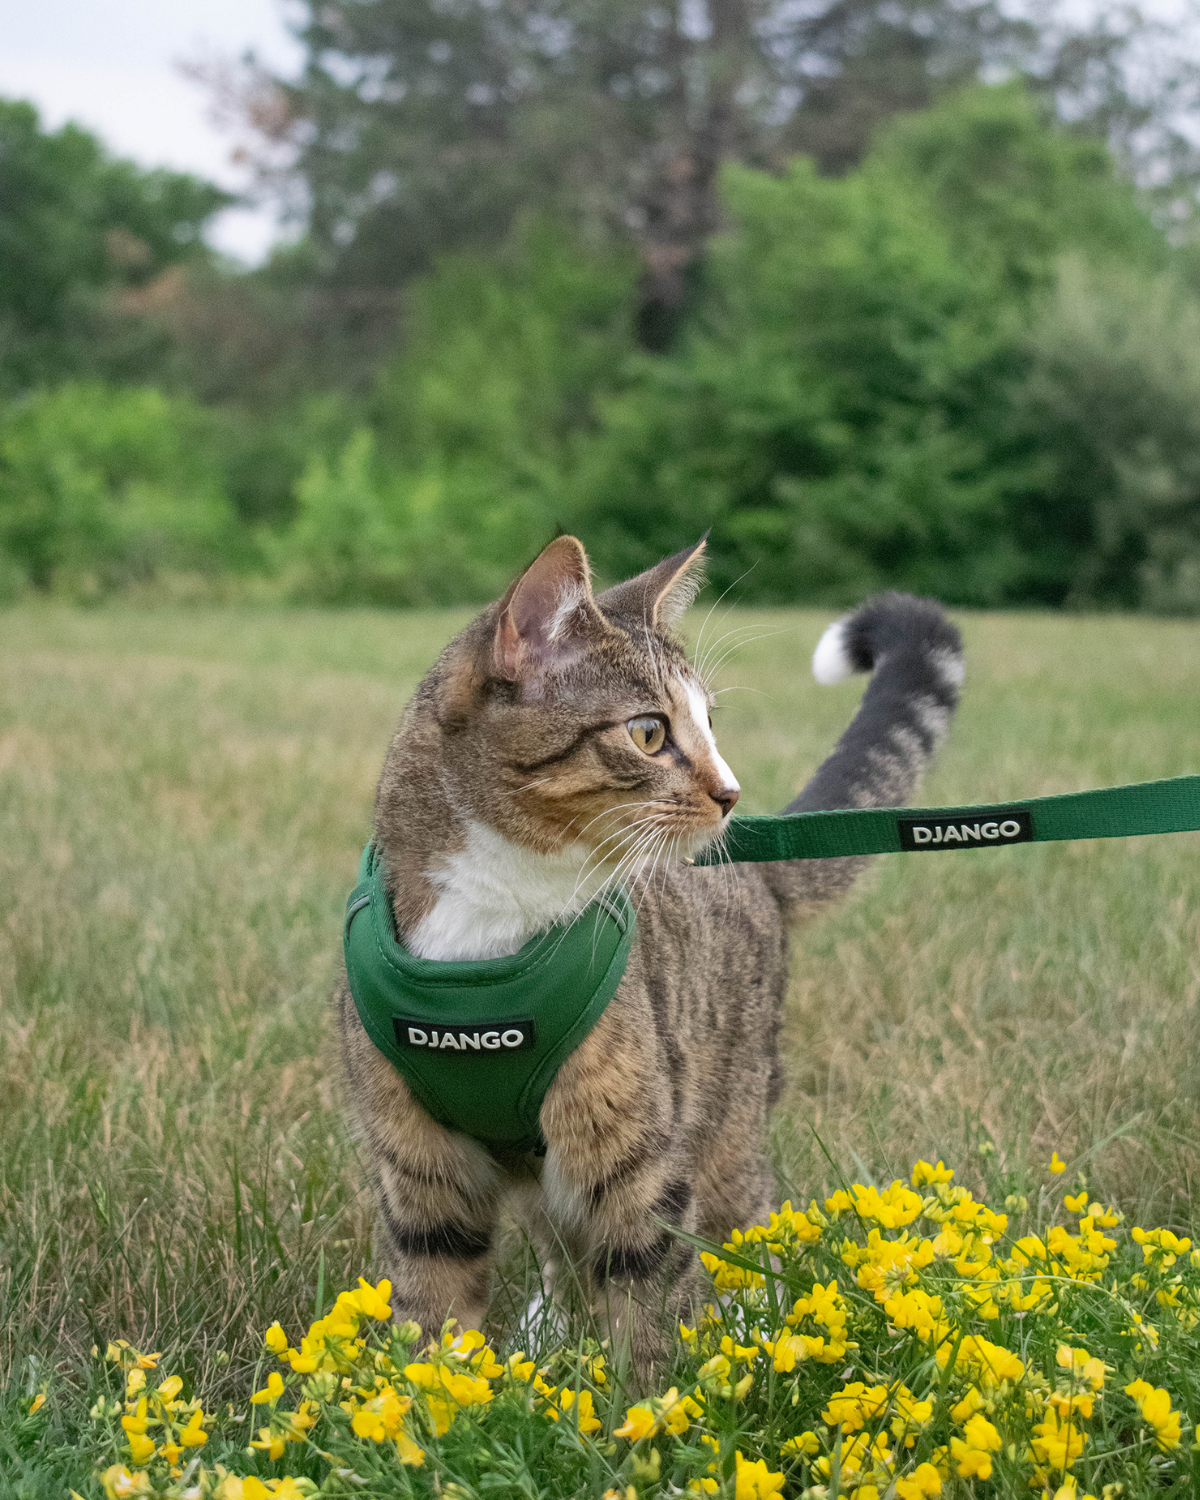 Bea is an adorable and outdoor-loving rescue tabby cat. Bea wears size small in DJANGO cat harnesses and is seen here with DJANGO's matching 6.5 foot hands-free leash. - djangobrand.com